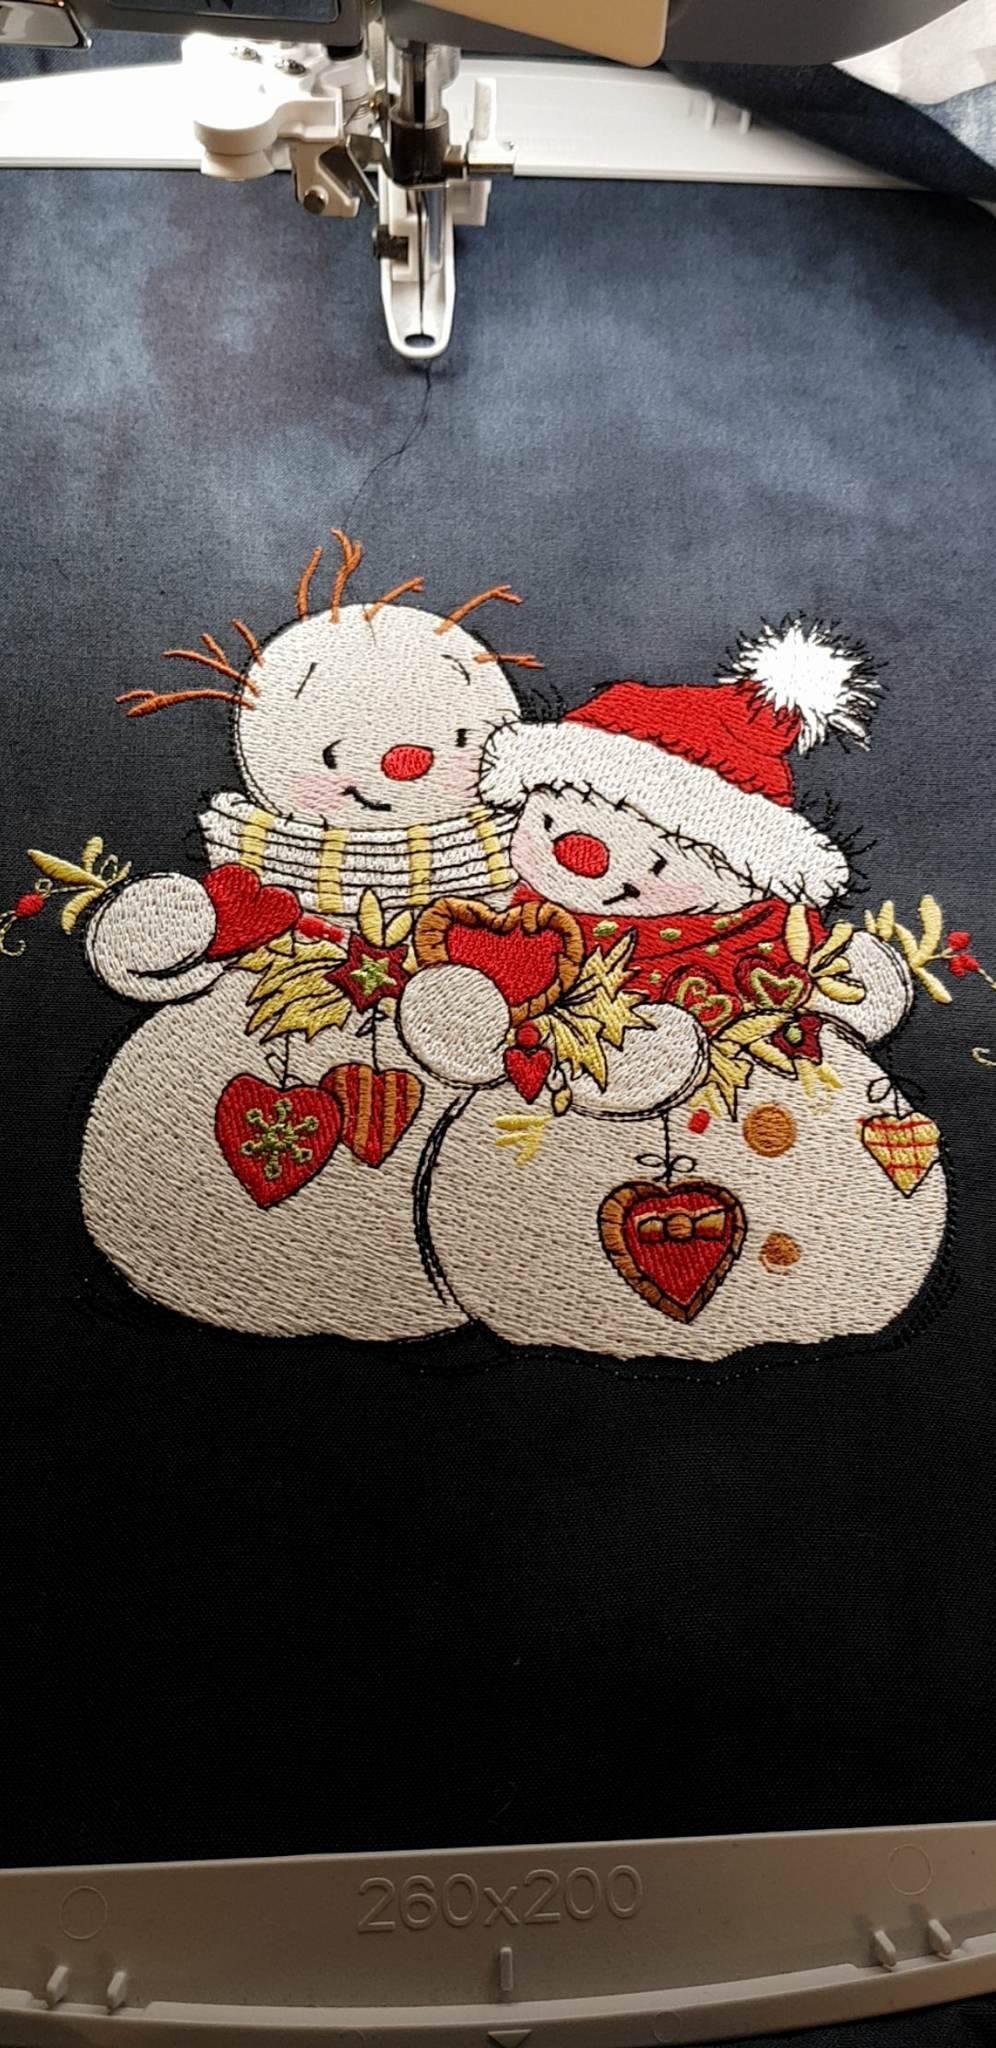 Snowmen with Christmas toys embroidery design in progress